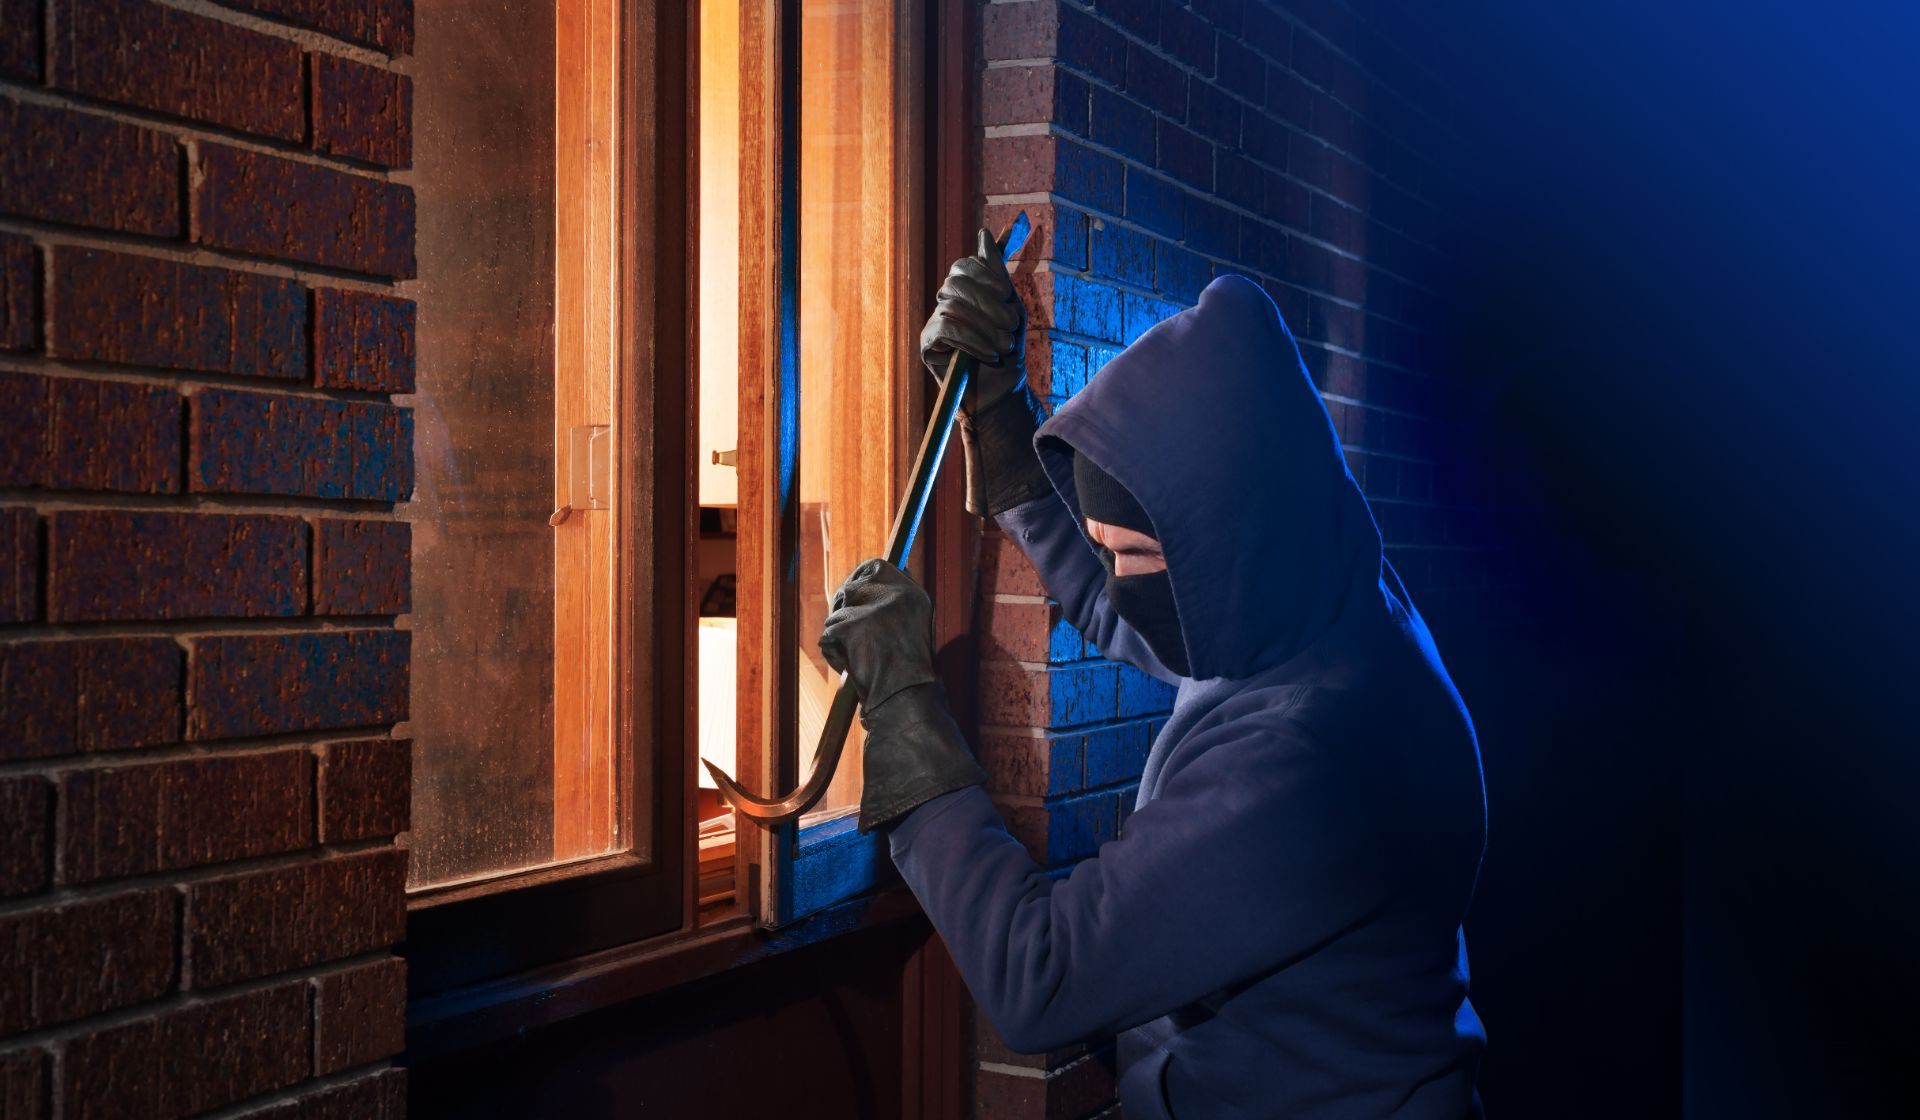 Man with hood breaking into a window